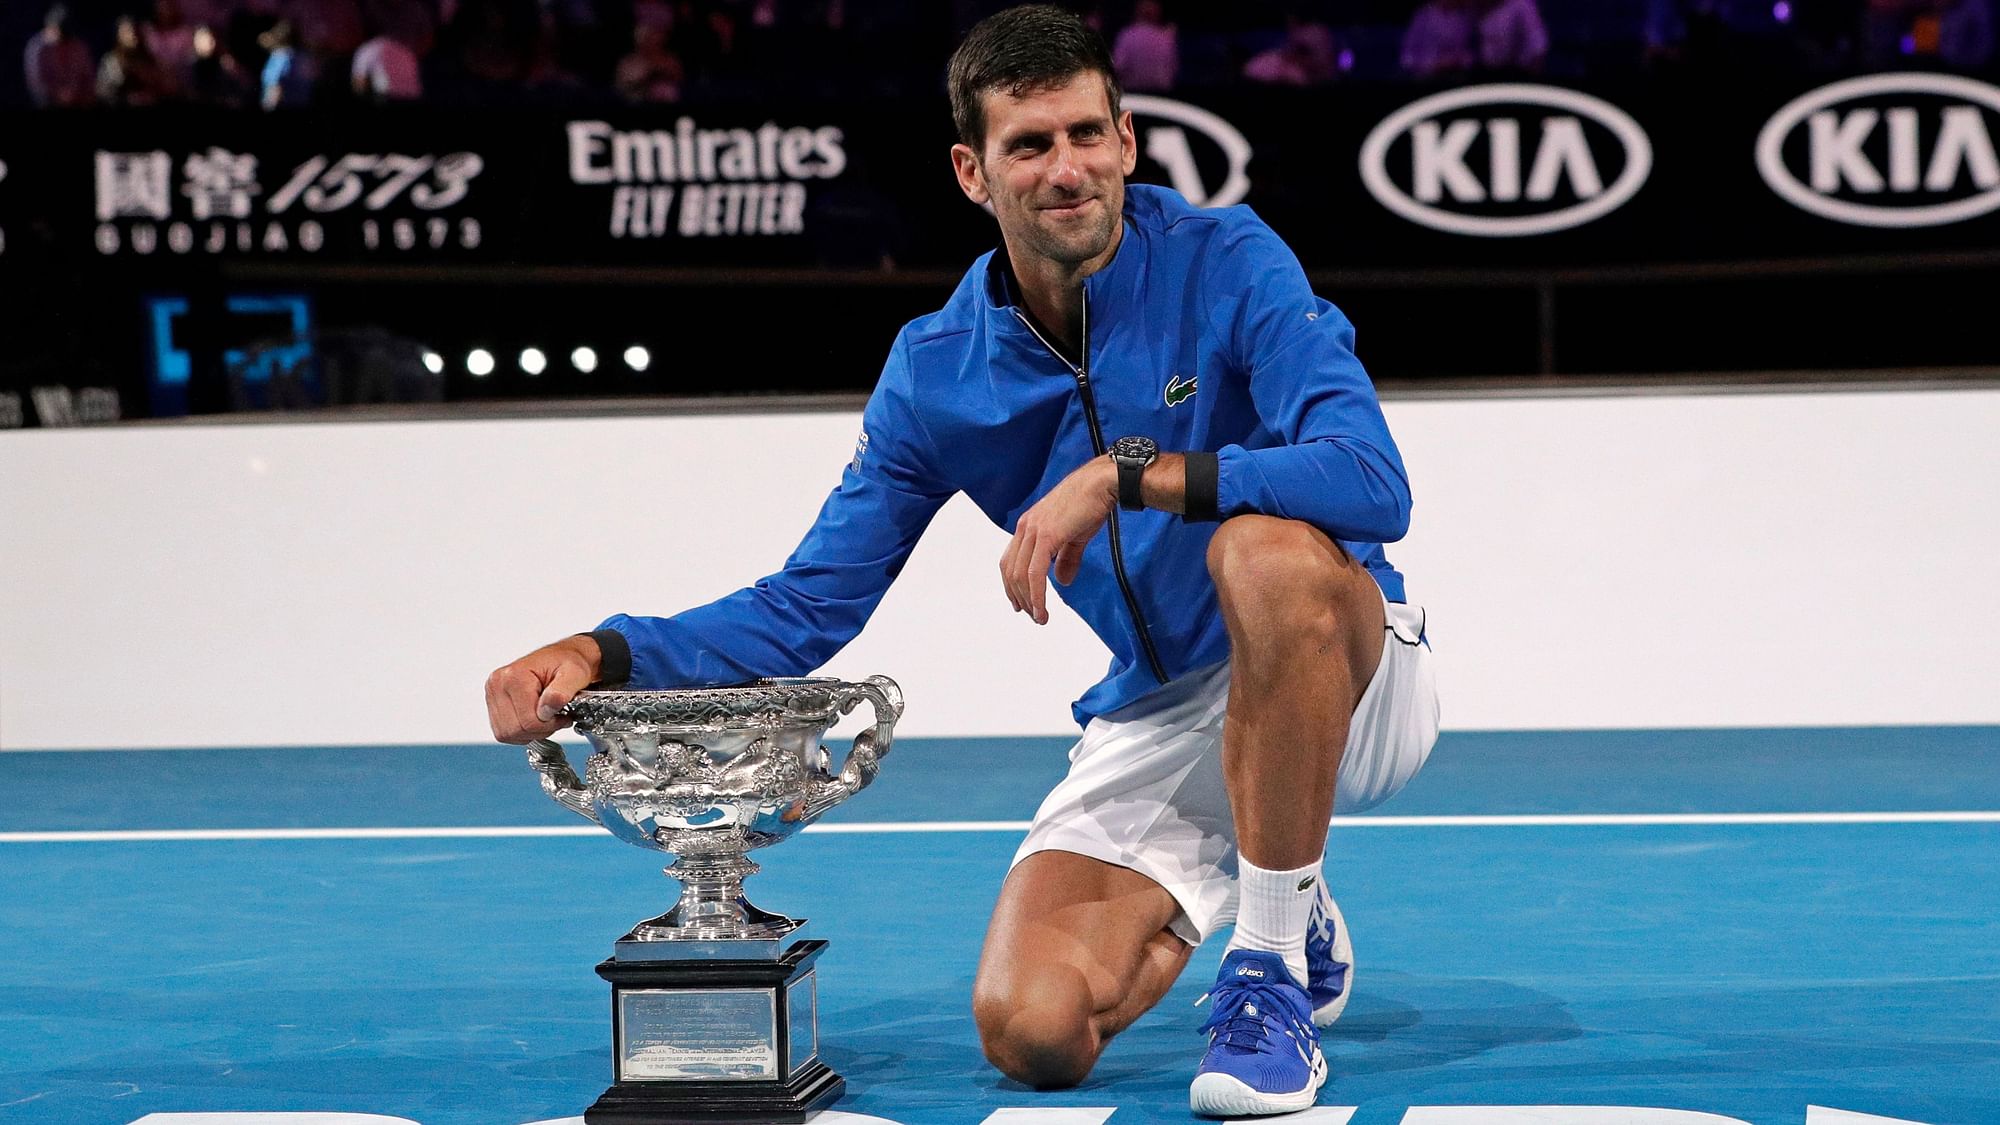 The No. 1-ranked Djokovic raised his major trophy total to 15, behind only Roger Federer’s 20 and Nadal’s 17.